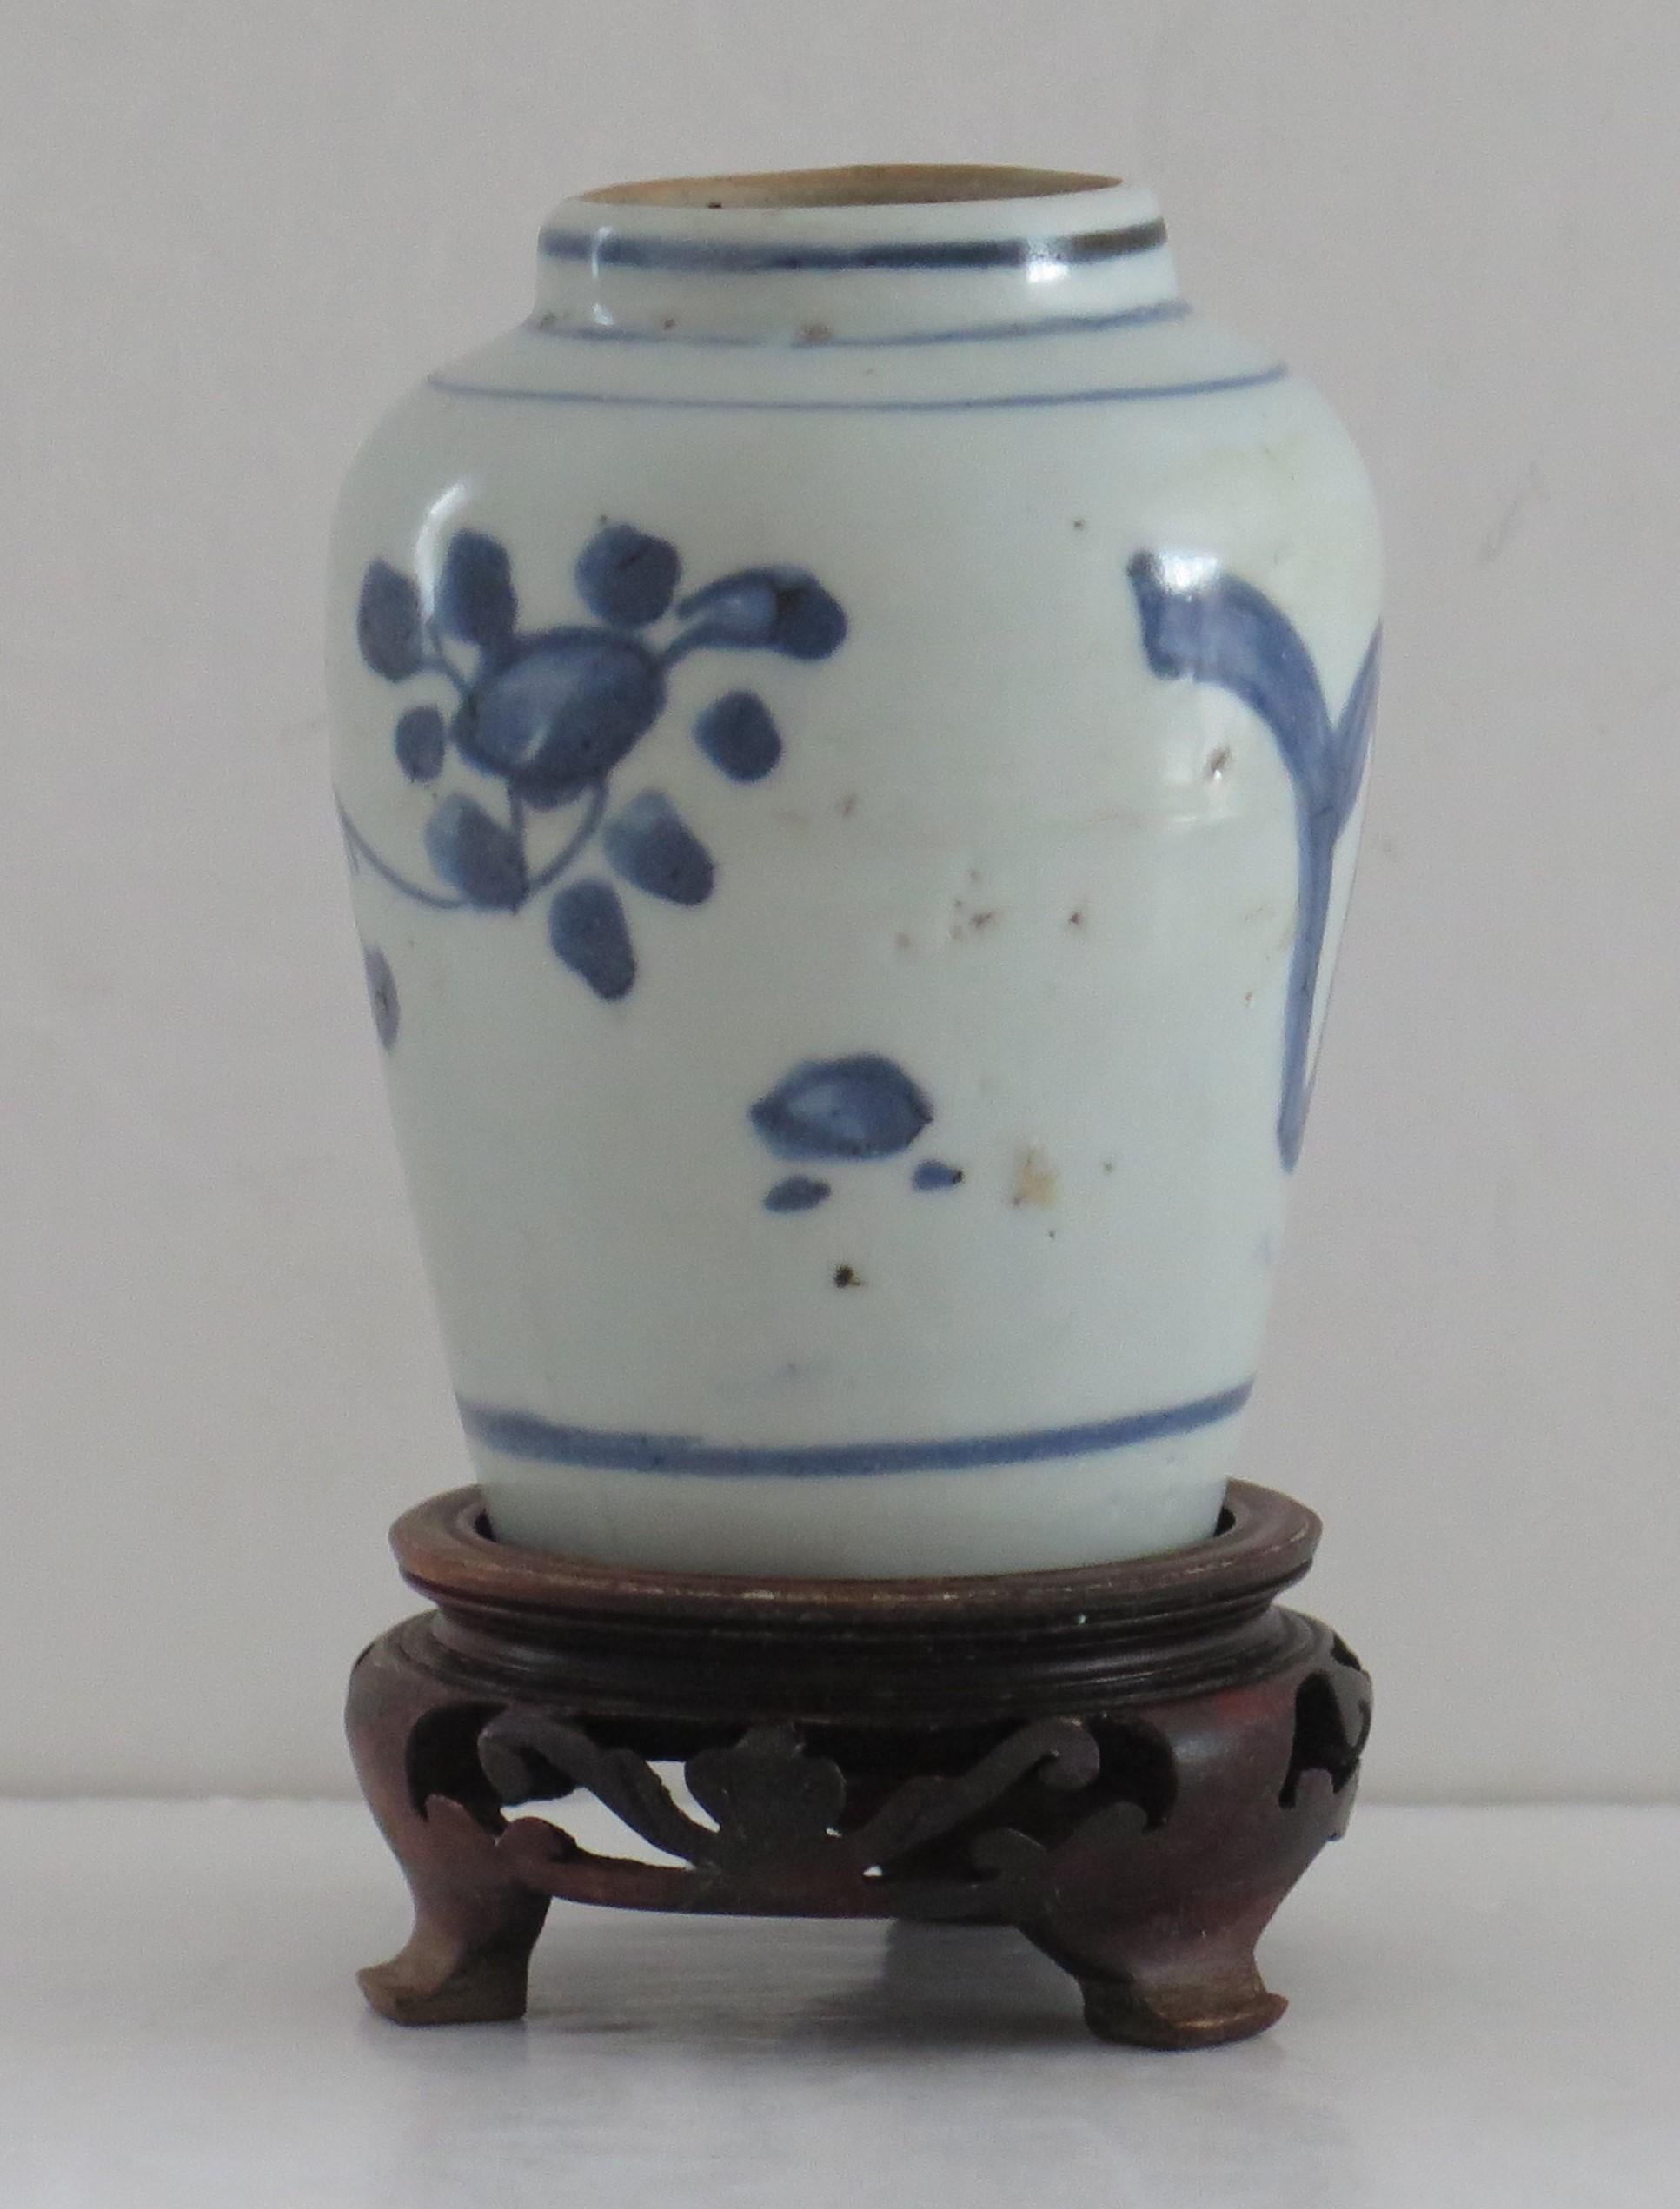 This is a hand painted 17th century, Ming dynasty, porcelain Jar or small Vase complete with a hand carved hardwood stand. 

The Jar is fairly thickly potted with no foot rim as is mostly the case with the early wares.

The Jar is decorated, in